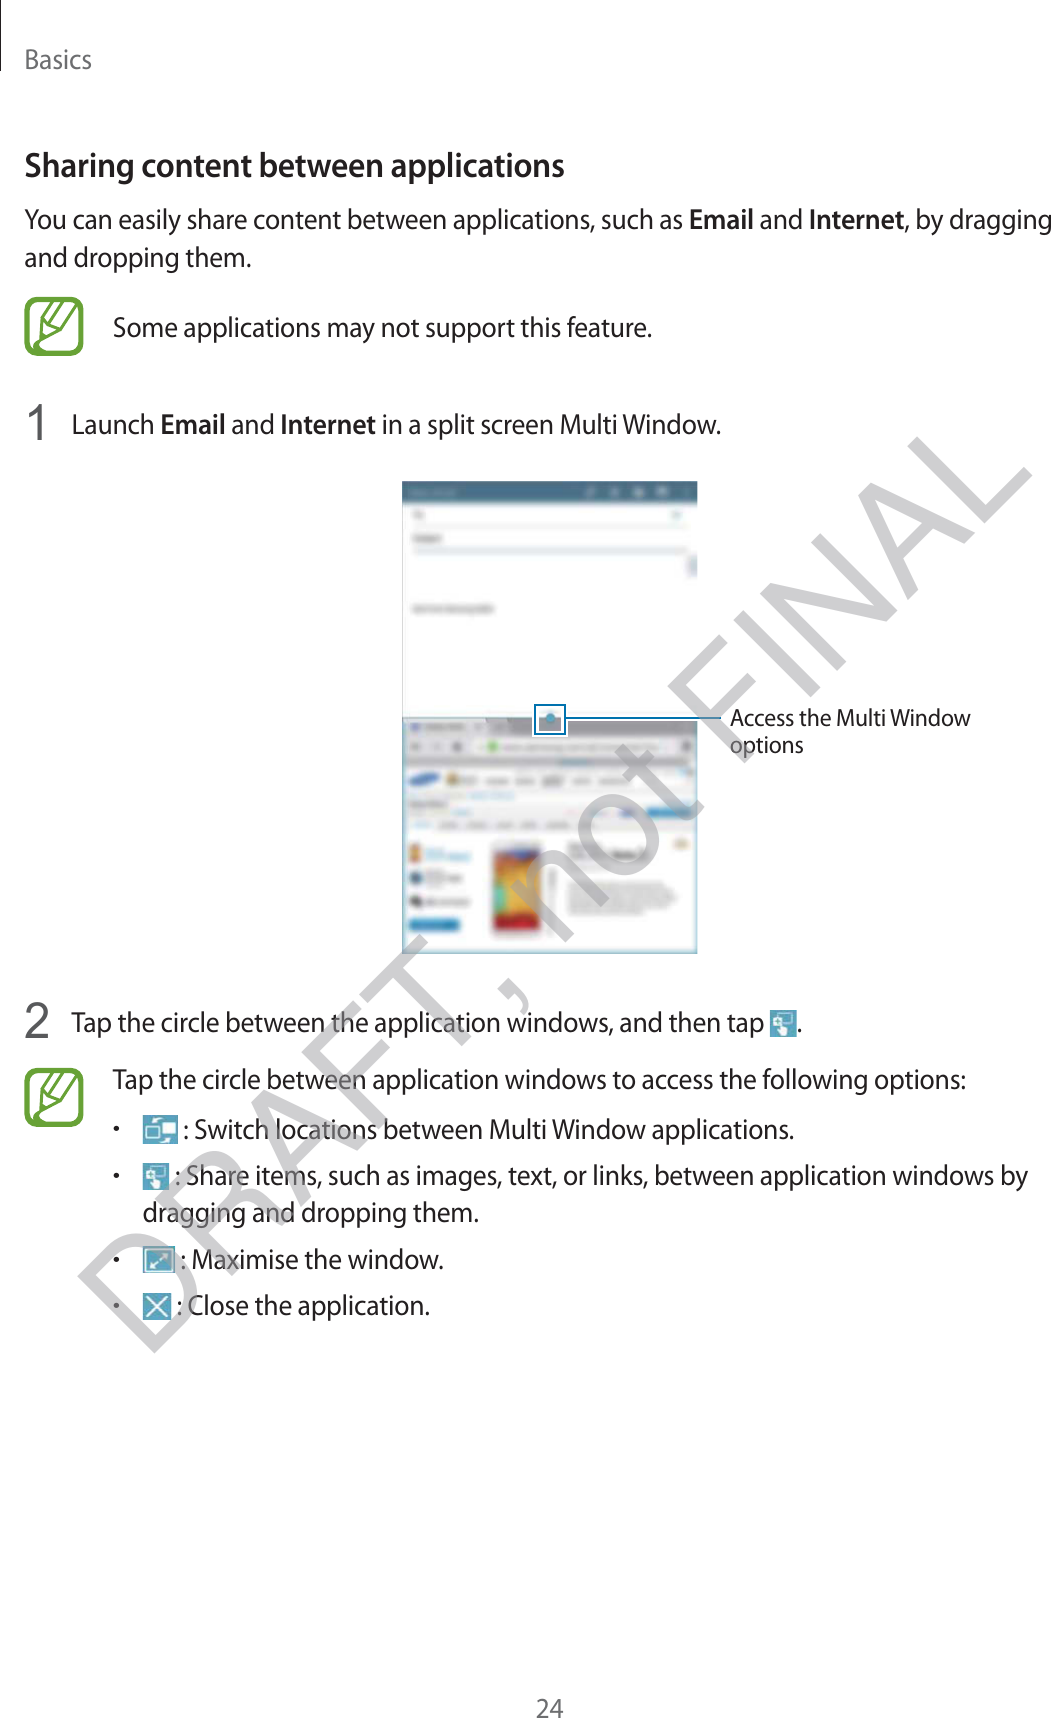 Basics24Sharing content between applicationsYou can easily share content between applications, such as Email and Internet, by dragging and dropping them.Some applications may not support this feature.1  Launch Email and Internet in a split screen Multi Window.Access the Multi Window options2  Tap the circle between the application windows, and then tap  .Tap the circle between application windows to access the following options:r : Switch locations between Multi Window applications.r : Share items, such as images, text, or links, between application windows by dragging and dropping them.r : Maximise the window.r : Close the application.DRAFT, not FINAL